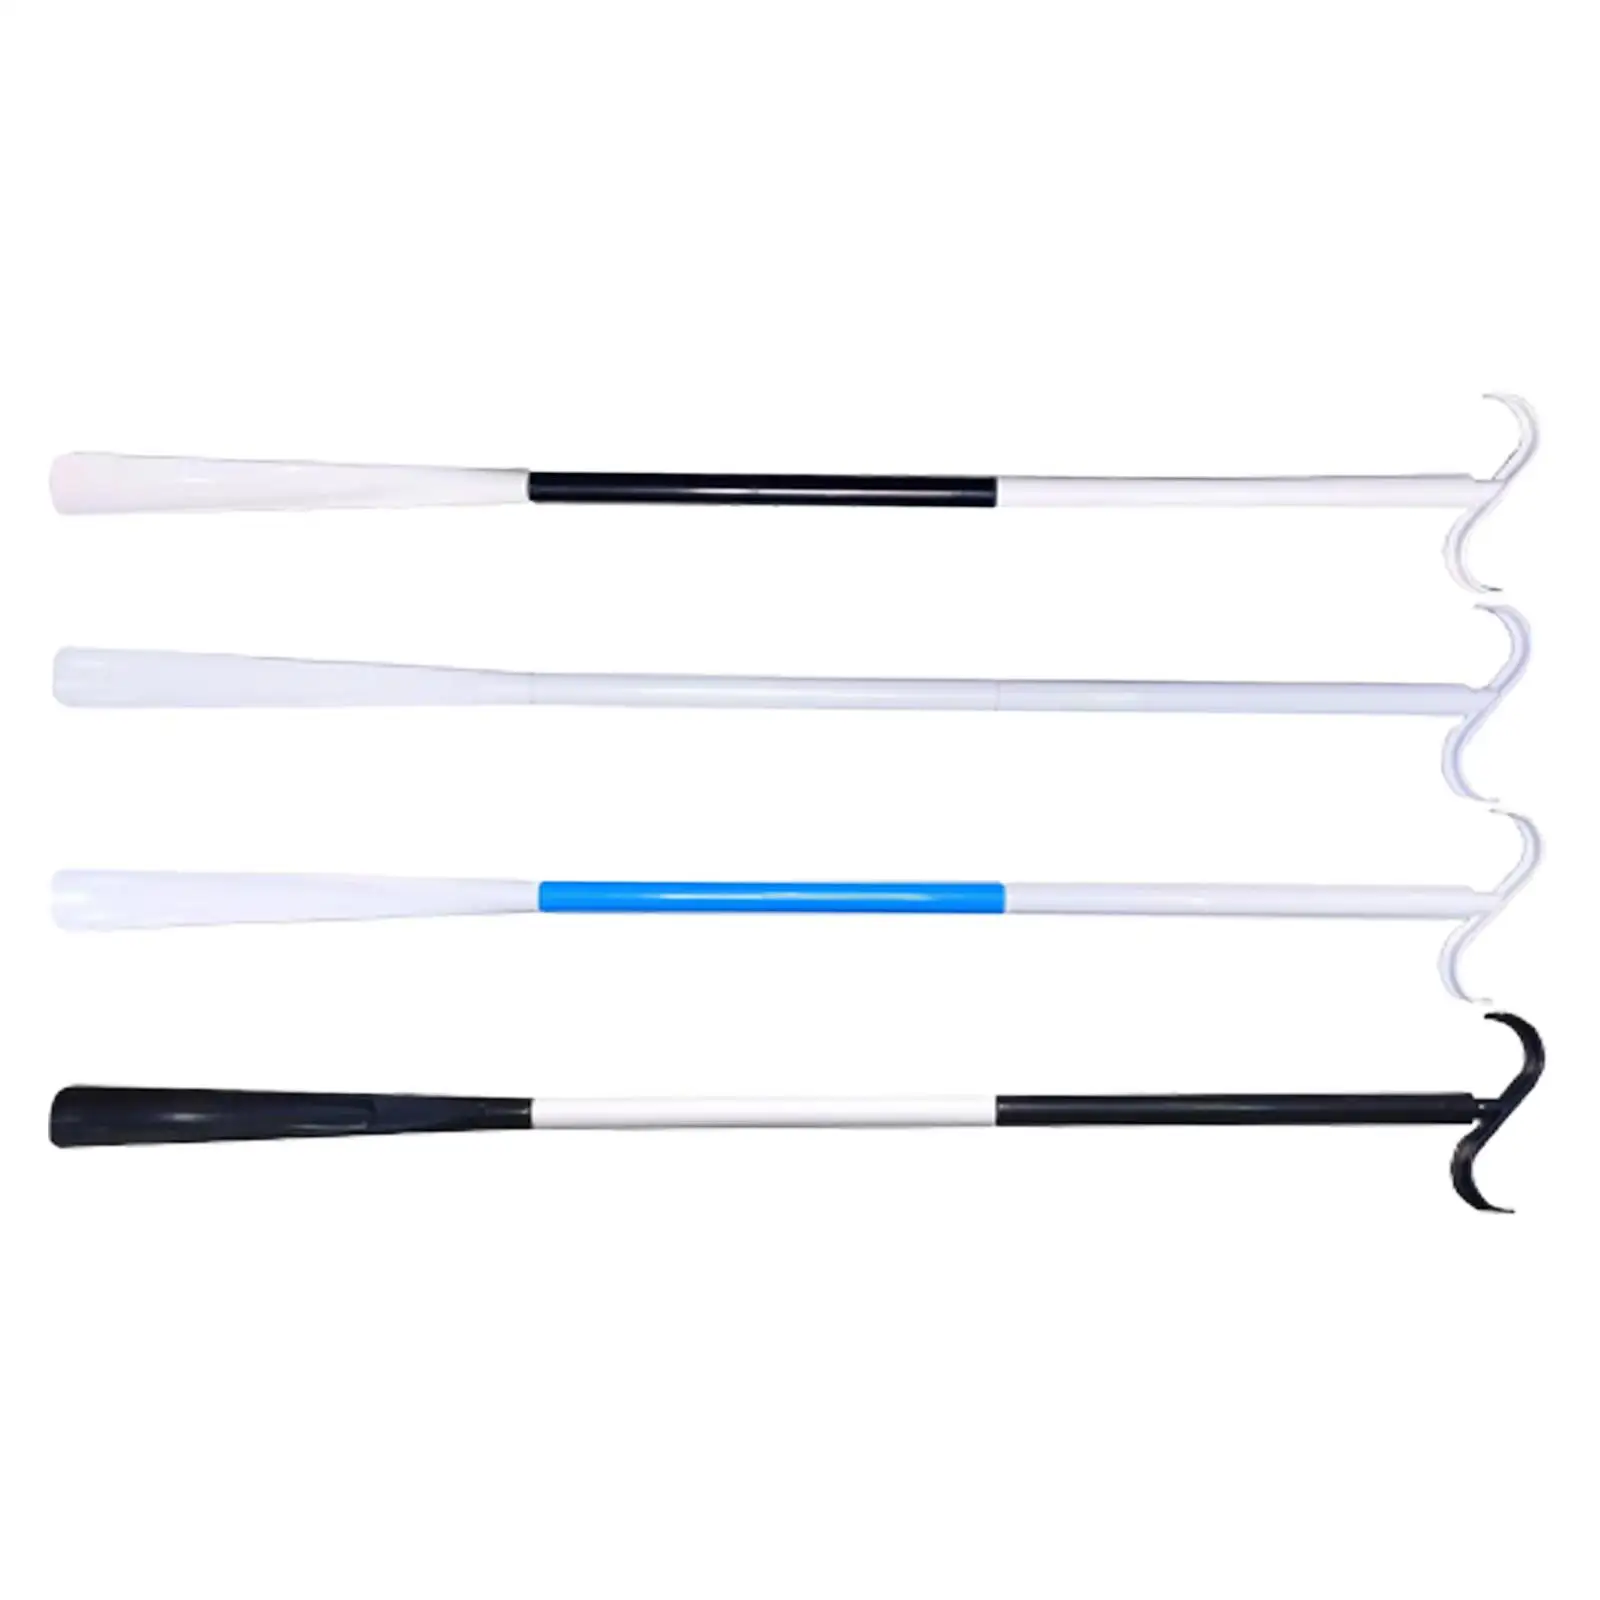 Dressing Stick Aid Adjustable Extended Shoehorn for Socks Shoes Back Problem Shoes Socks Dressing Aids with Shoehorn Assisted